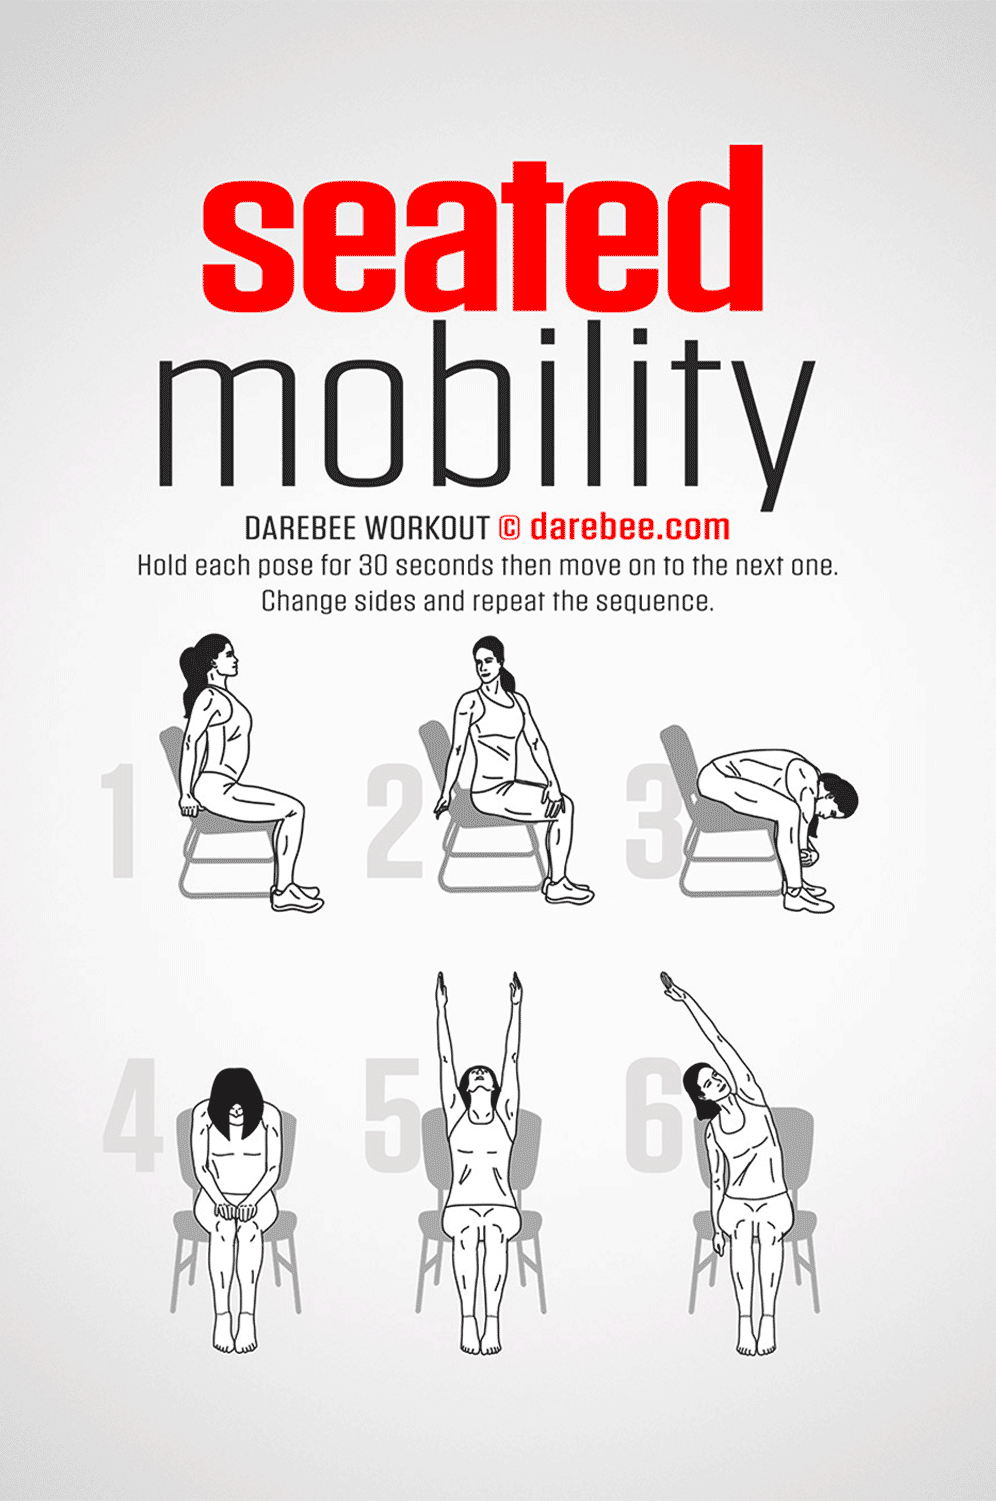 seated mobility